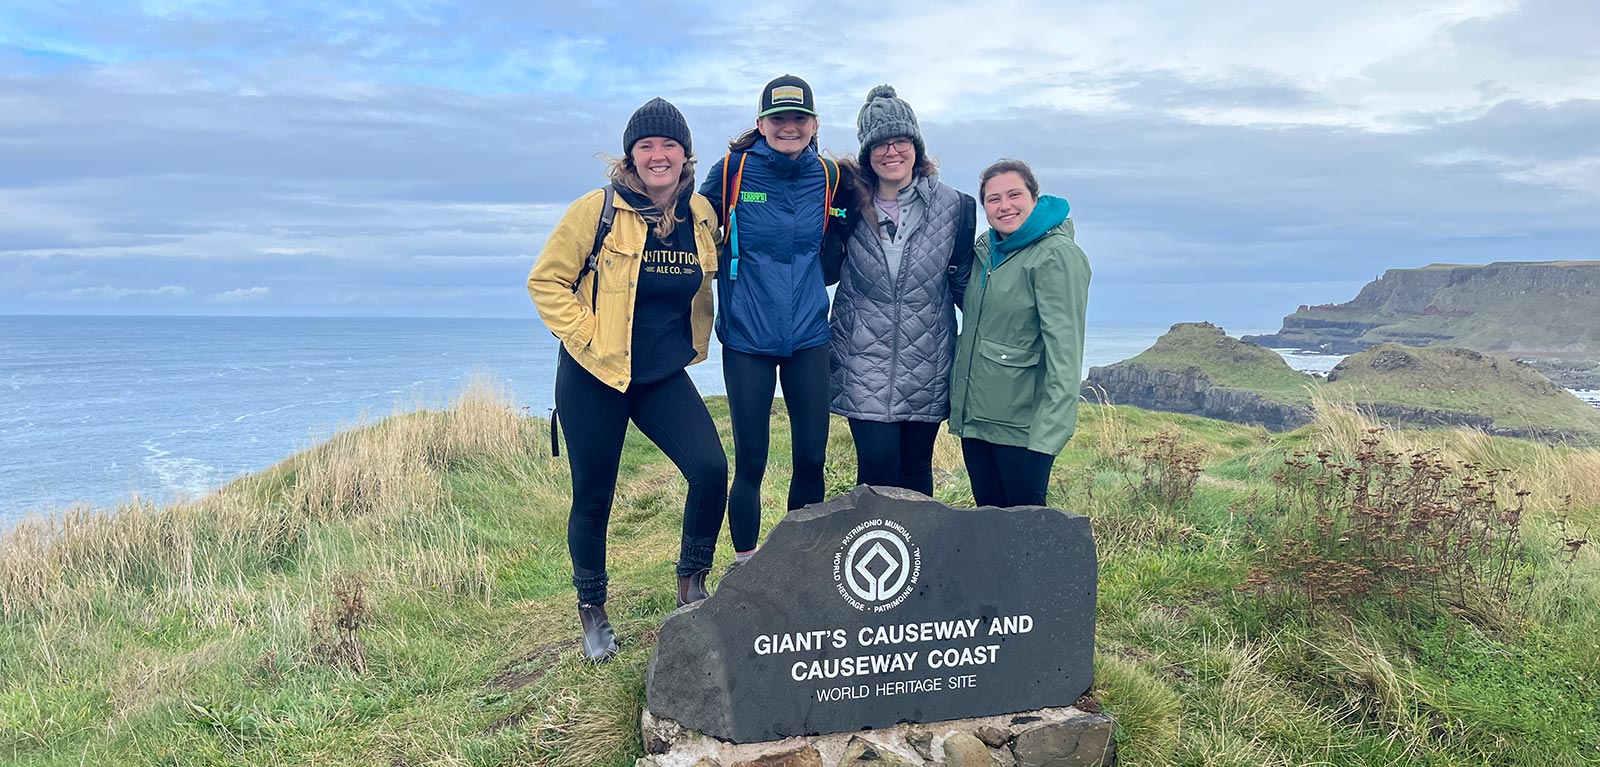 Sami and her friends at the Giant's Causeway